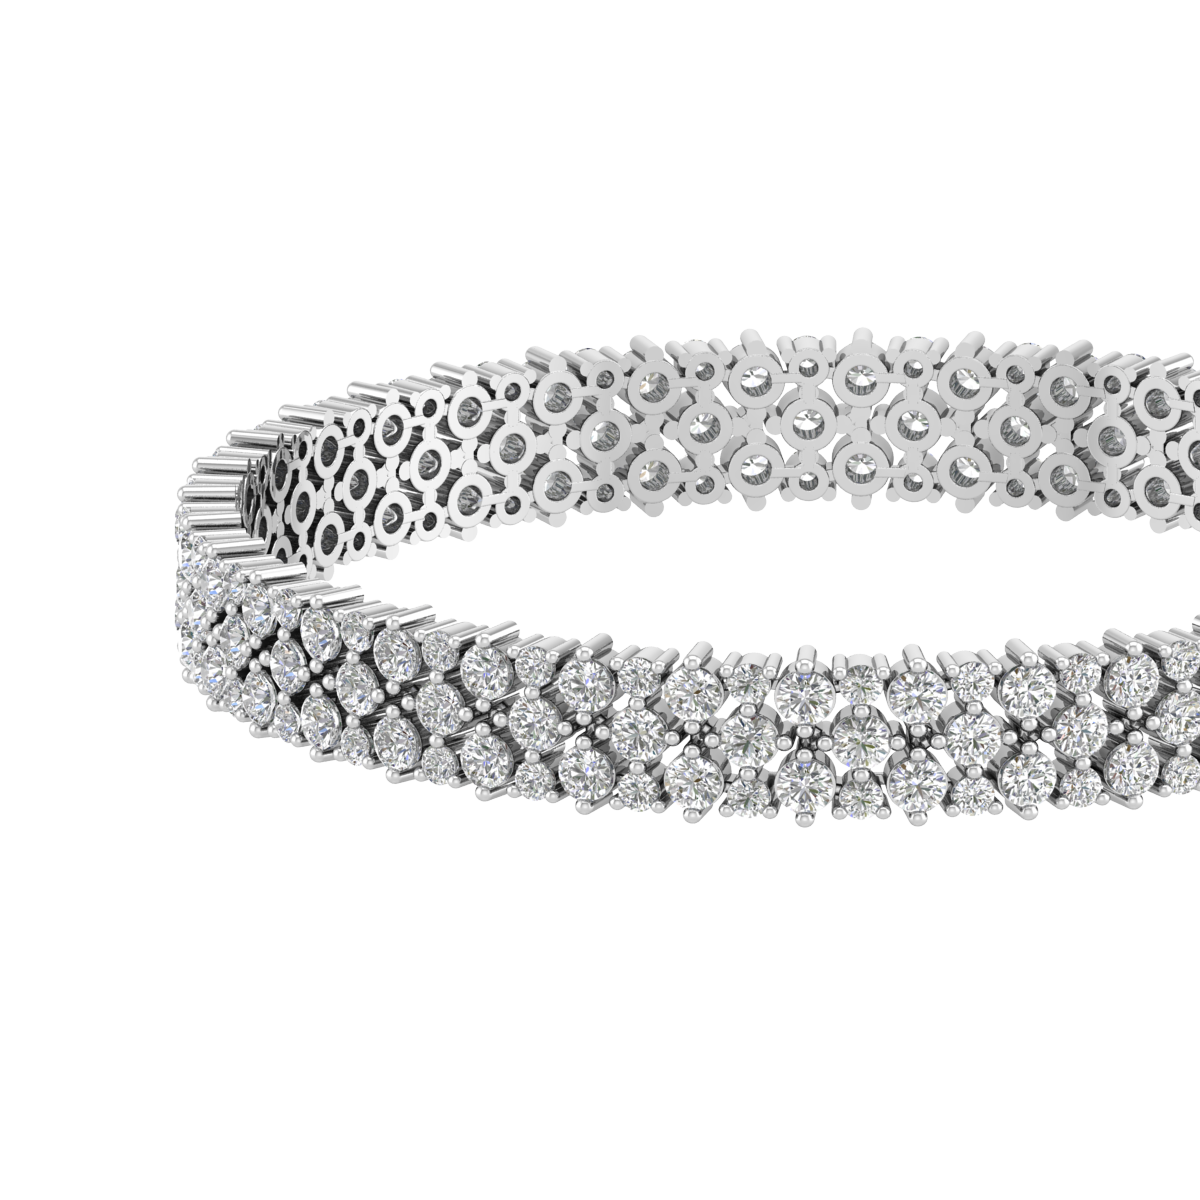 How to Tell If a Diamond Bracelet Is Real - ItsHot